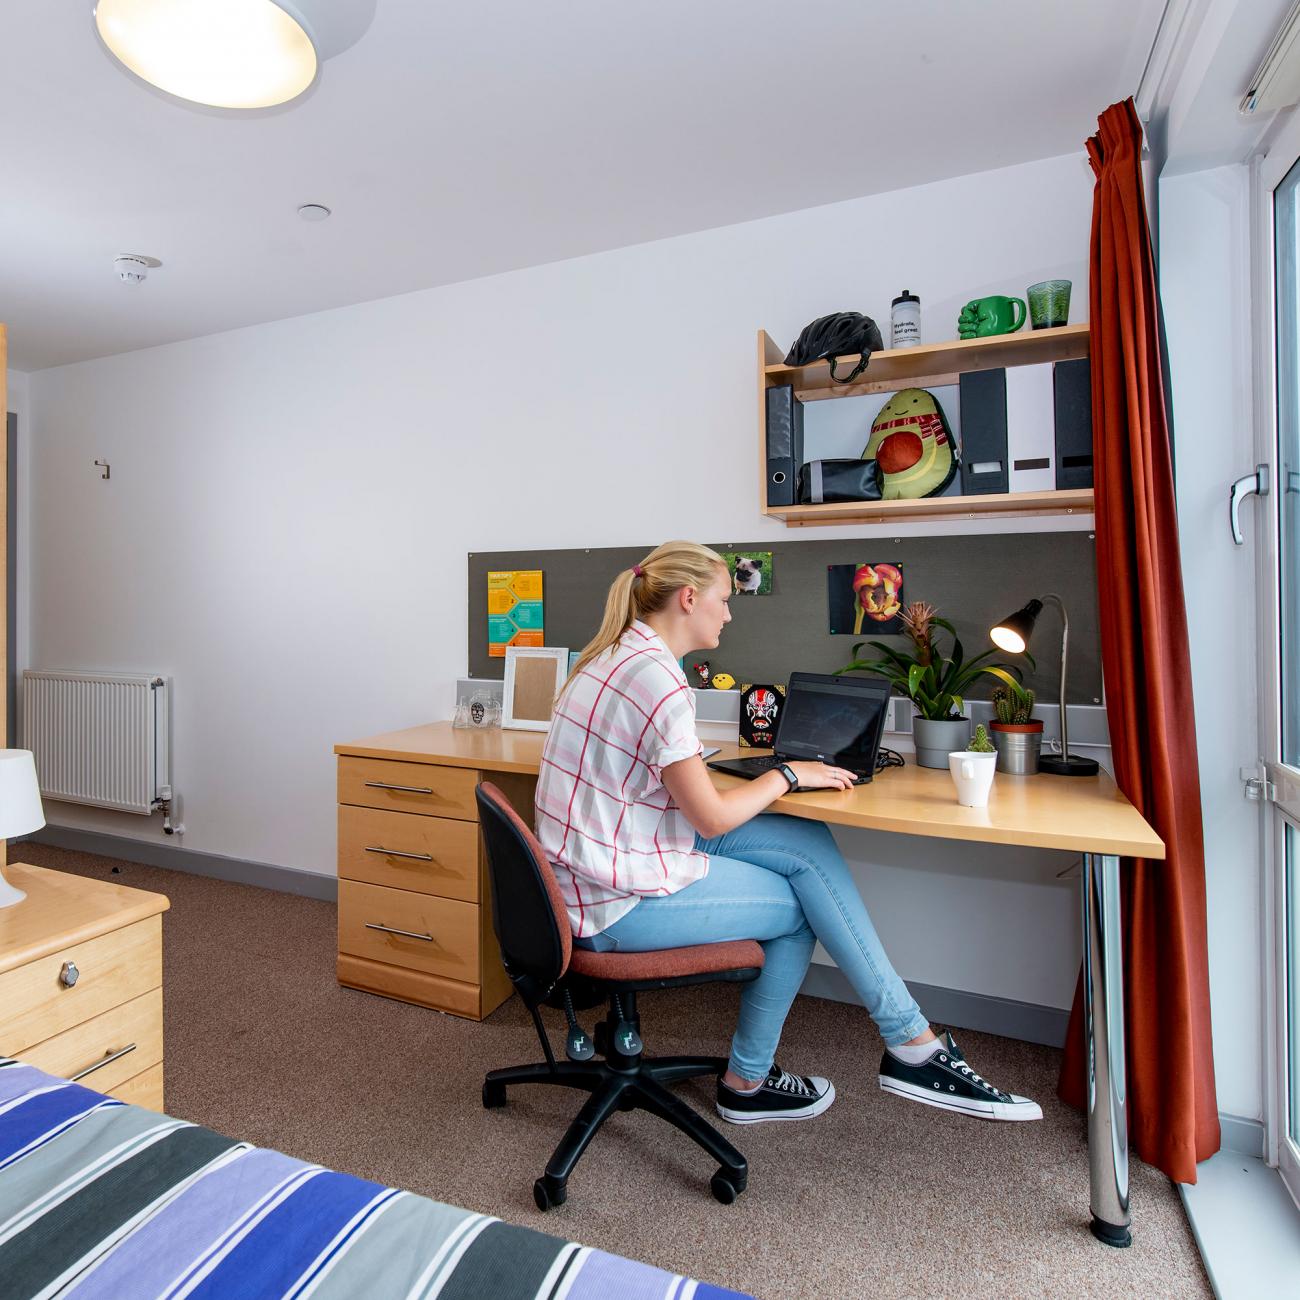 A spacious student bedroom showing a single bed, desk and wardrobe. A student sits at the desk, working on a laptop.